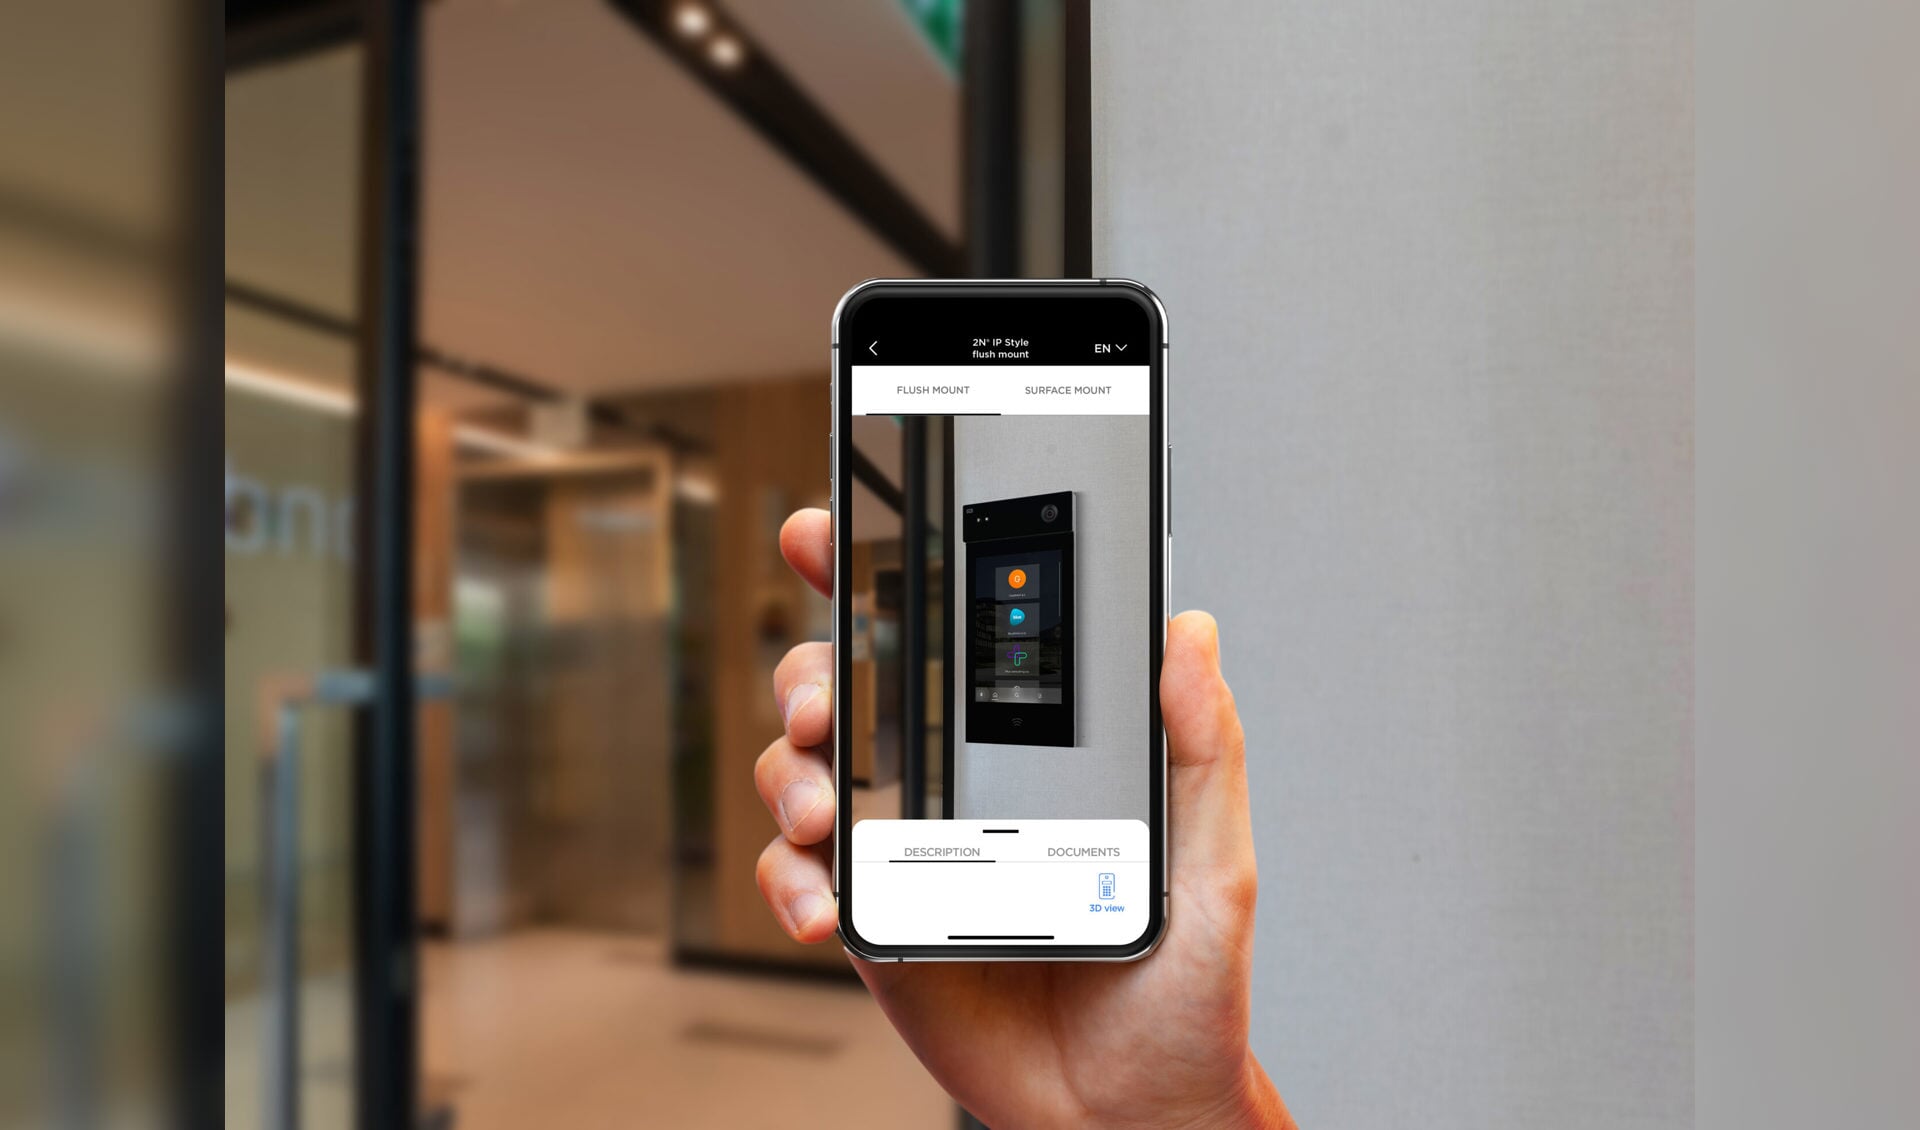 Face scanner on a building entrance wifi system to unlock the door security system. Face scanner for face recognition, password, time recording, work in-out and unlock doors in the office or building.